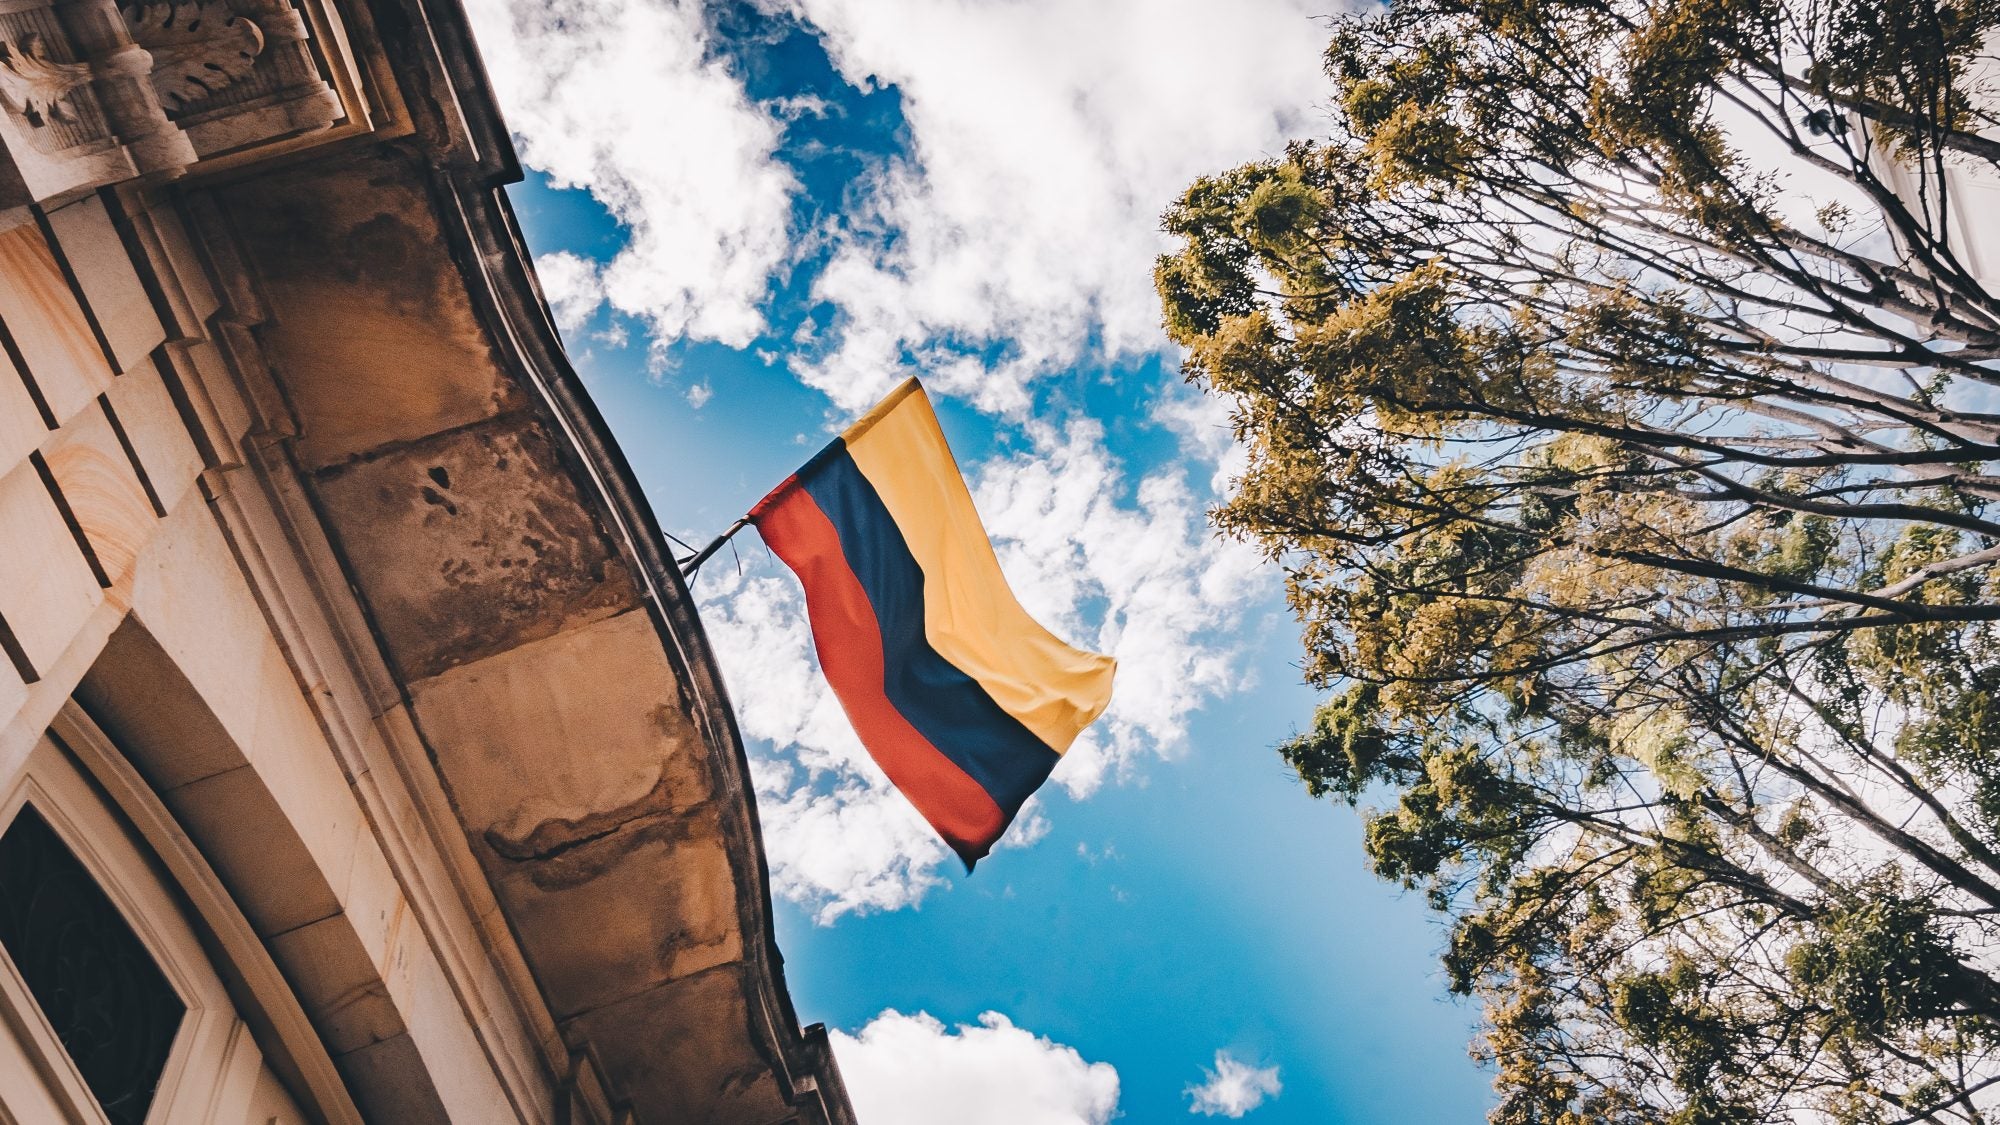 Colombian flag flying above building with blue sky and a tree above it.